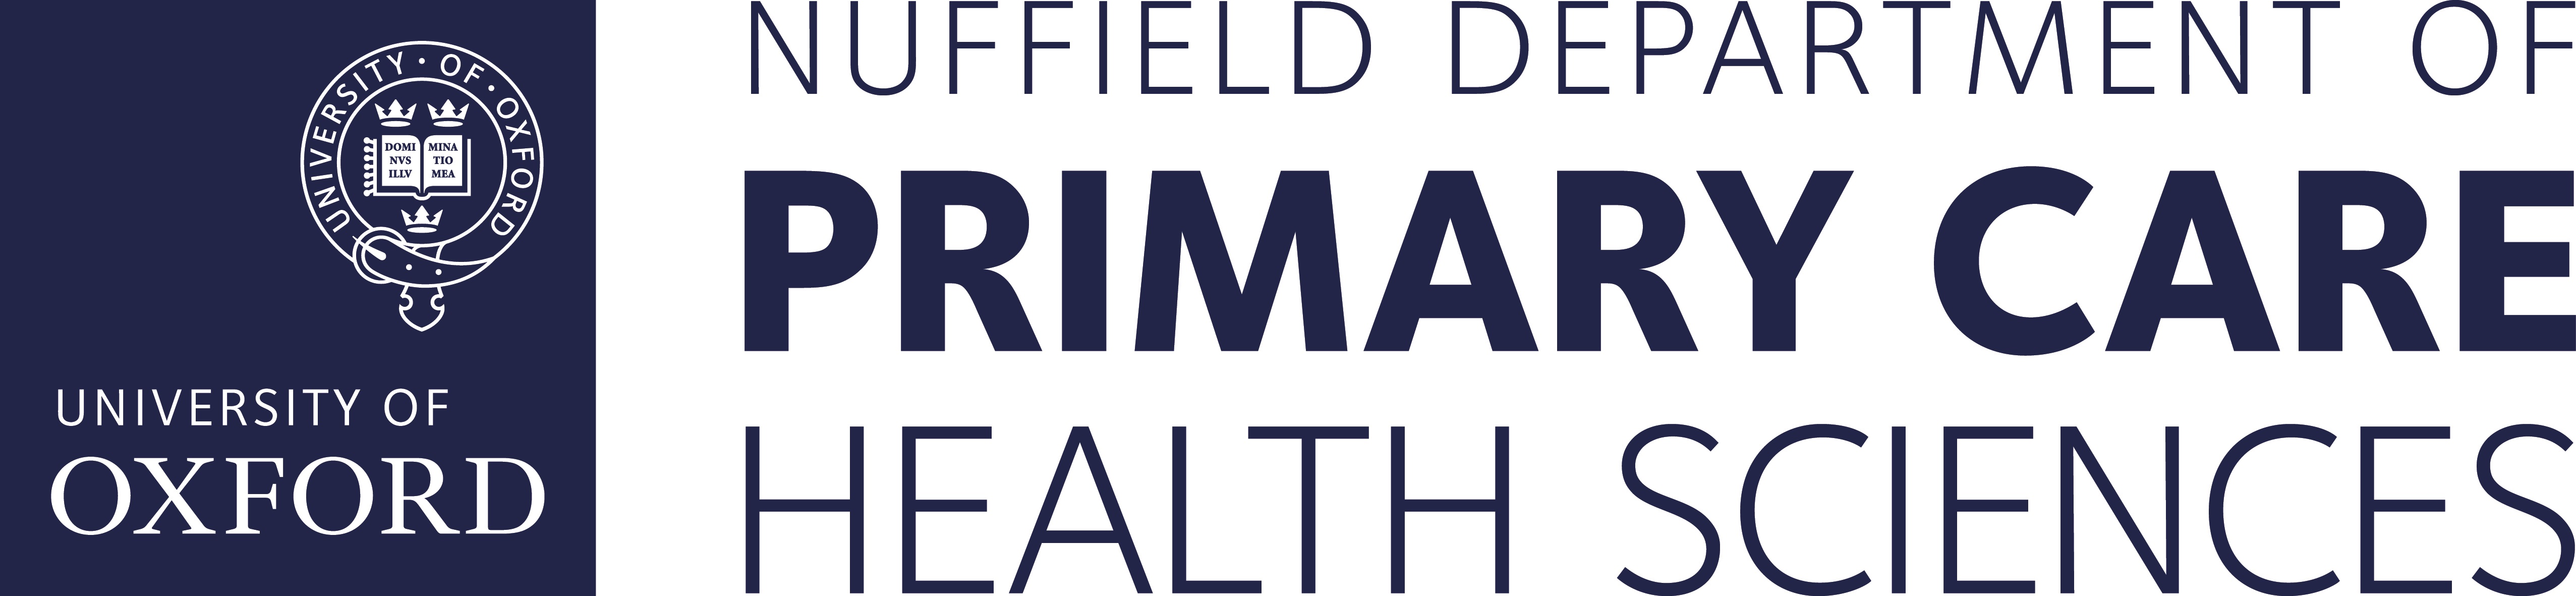 Oxford university Nuffield department of primary care health sciences logo